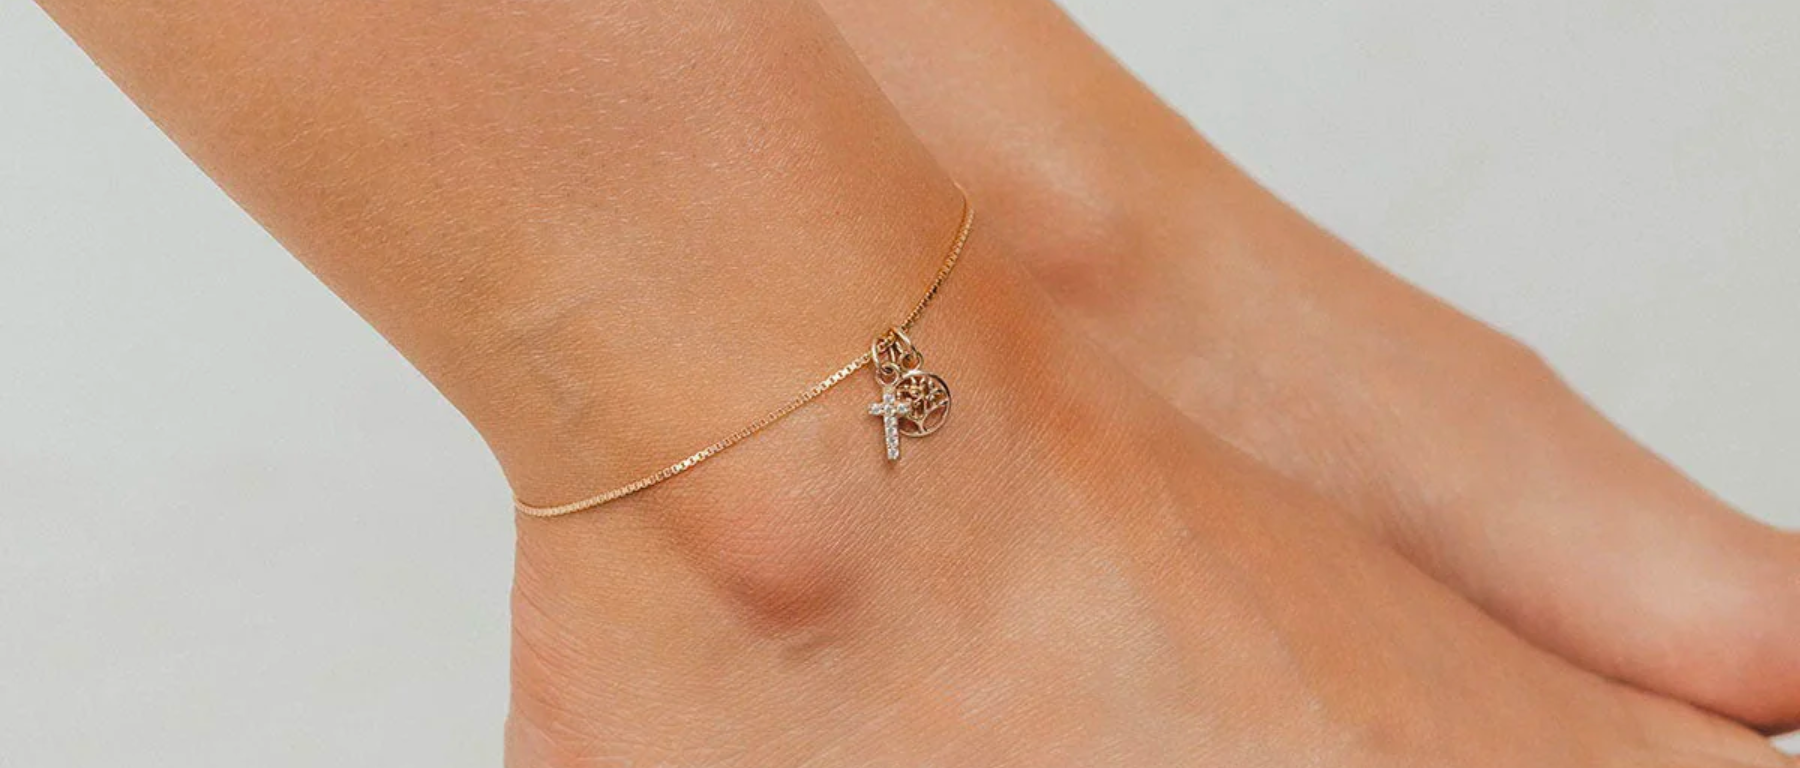 wehoautodetail CROSS CZ CHARM ADJUSTABLE ANKLET